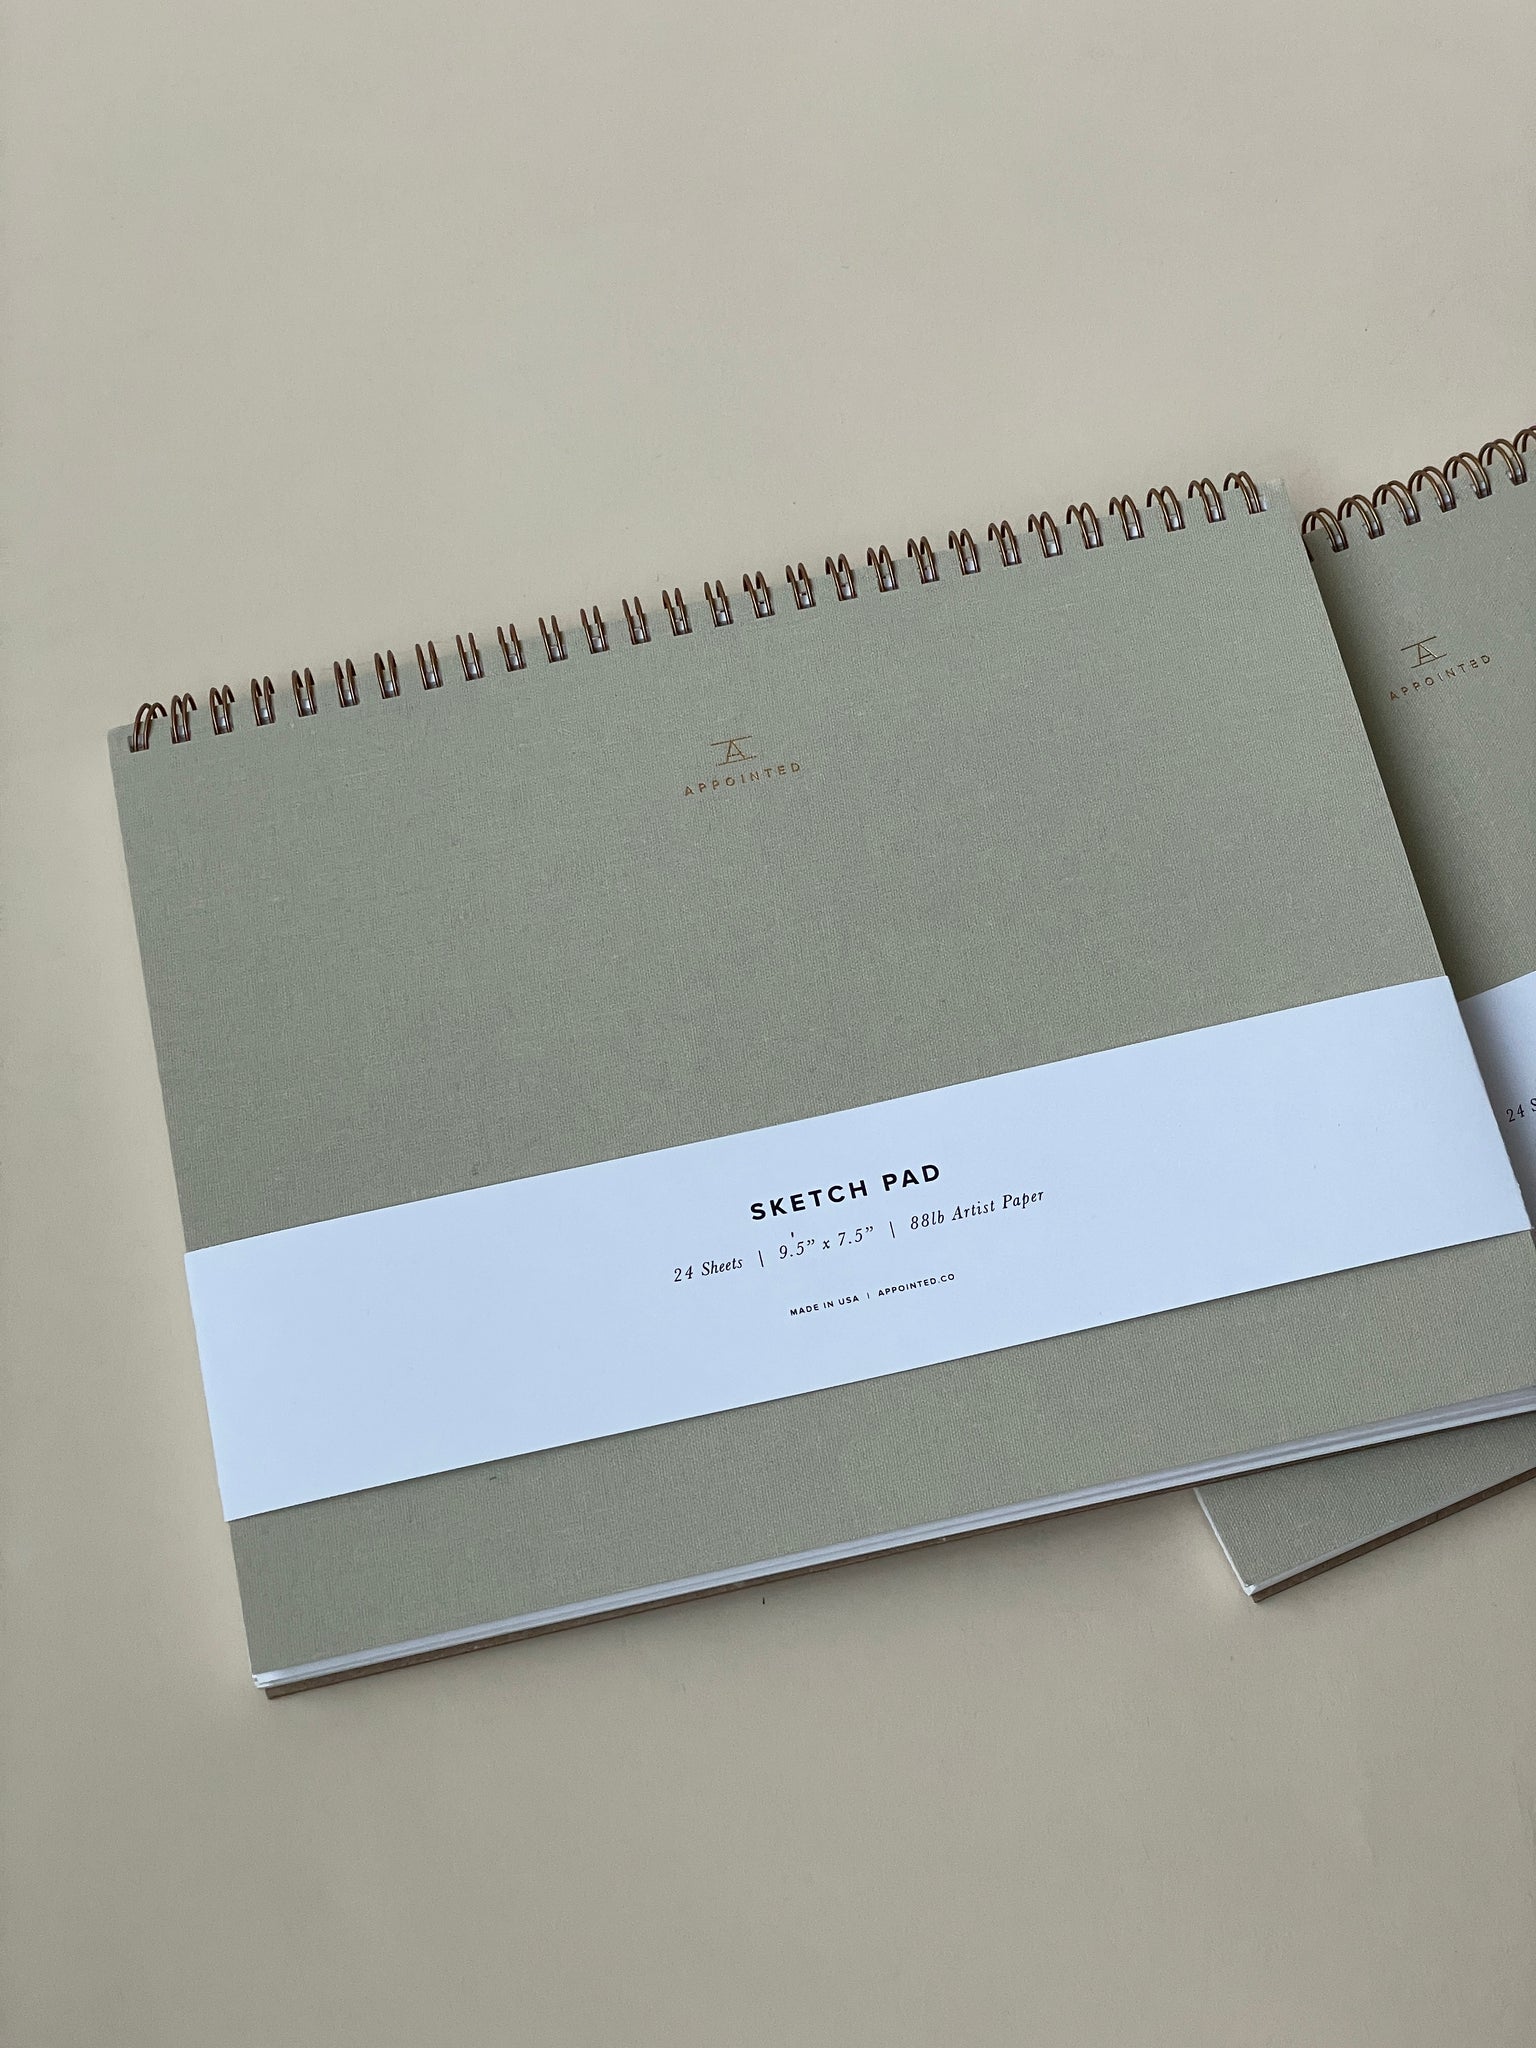 Sketch Pad by Appointed